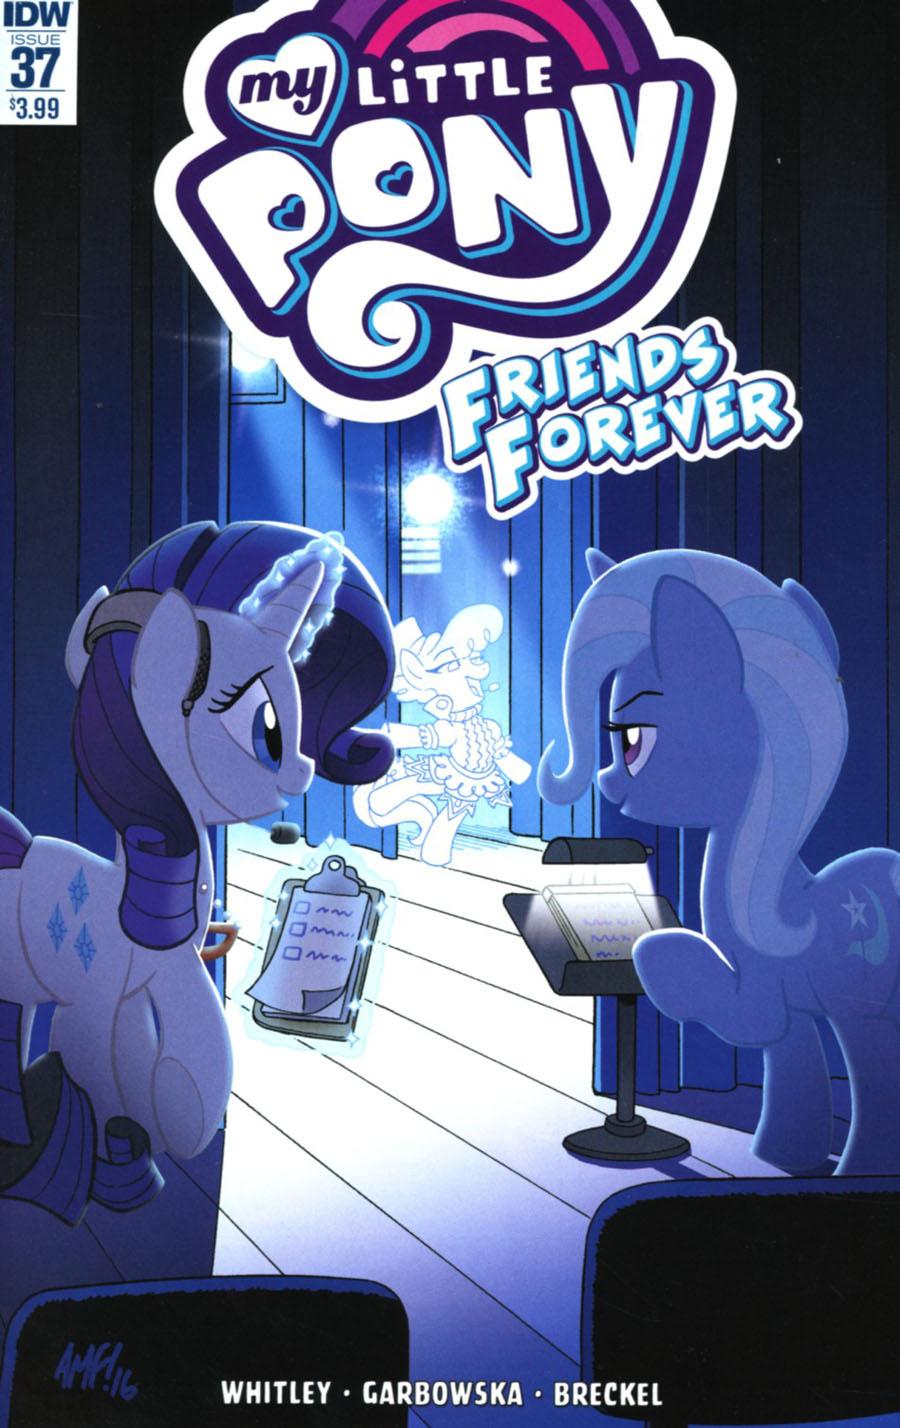 My Little Pony Friends Forever Vol. 1 #37